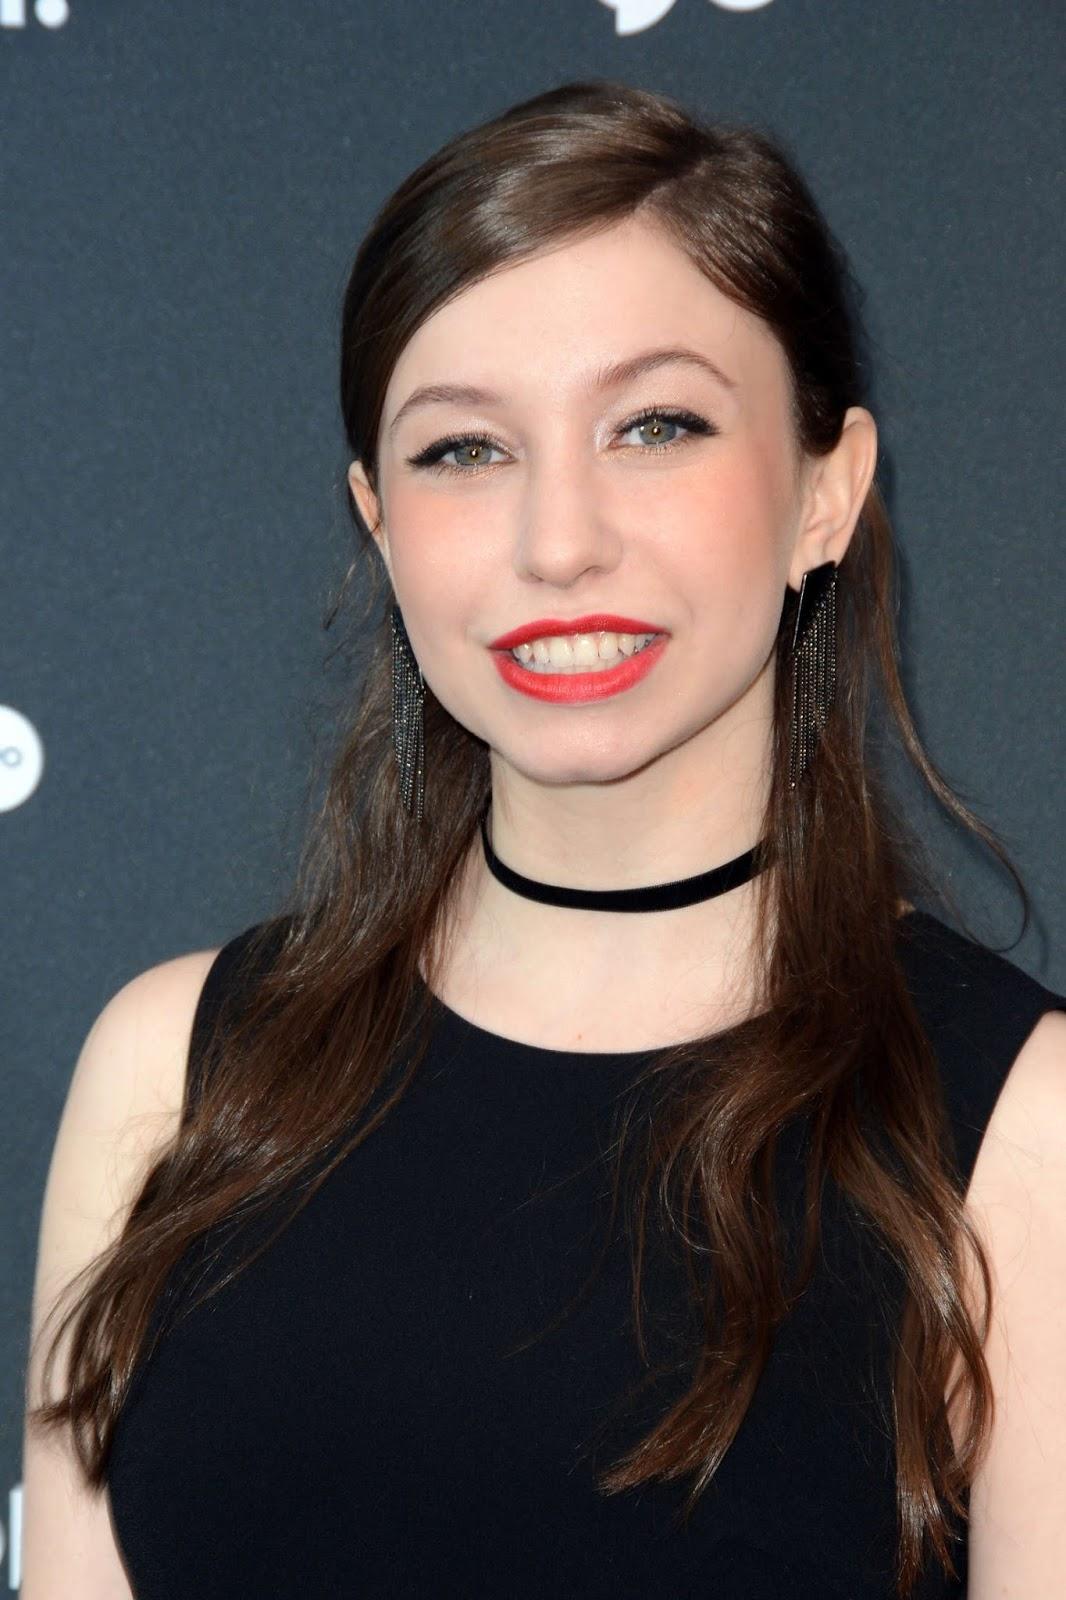 70+ Hot Pictures Of Katelyn Nacon Which Are Sure to Catch Your Attention 38